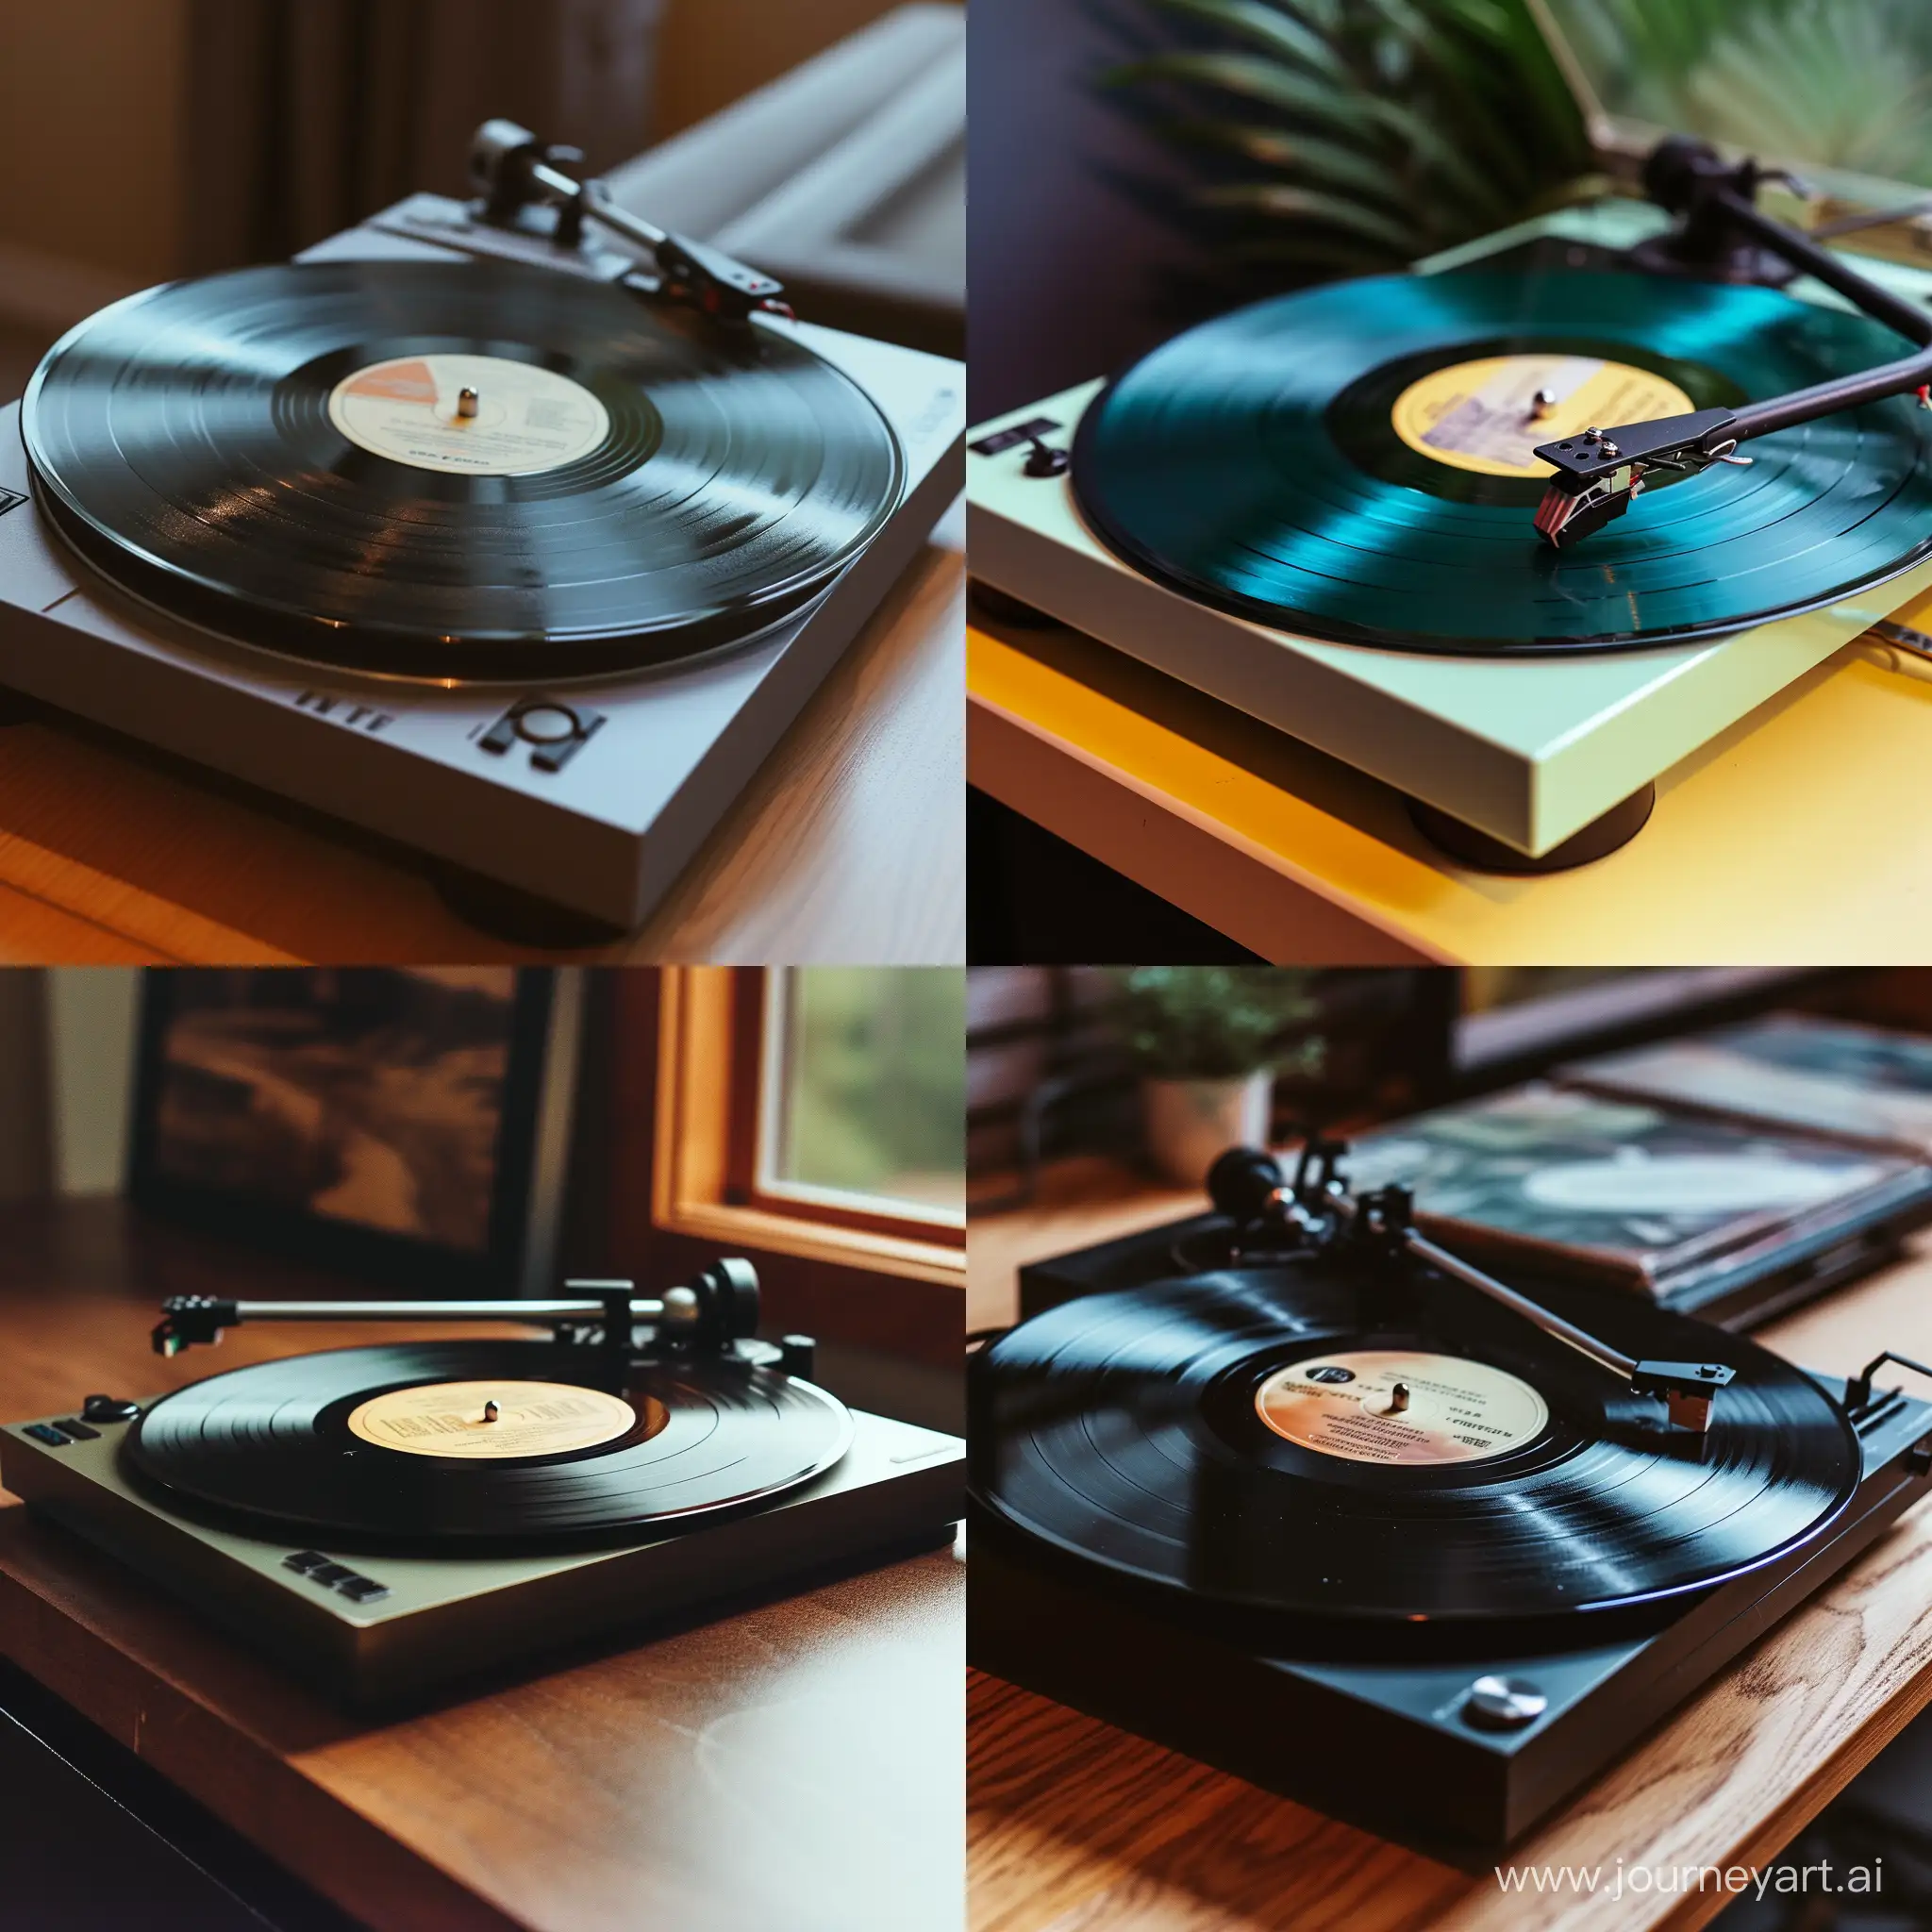 Vintage-Vinyl-Record-Player-on-Table